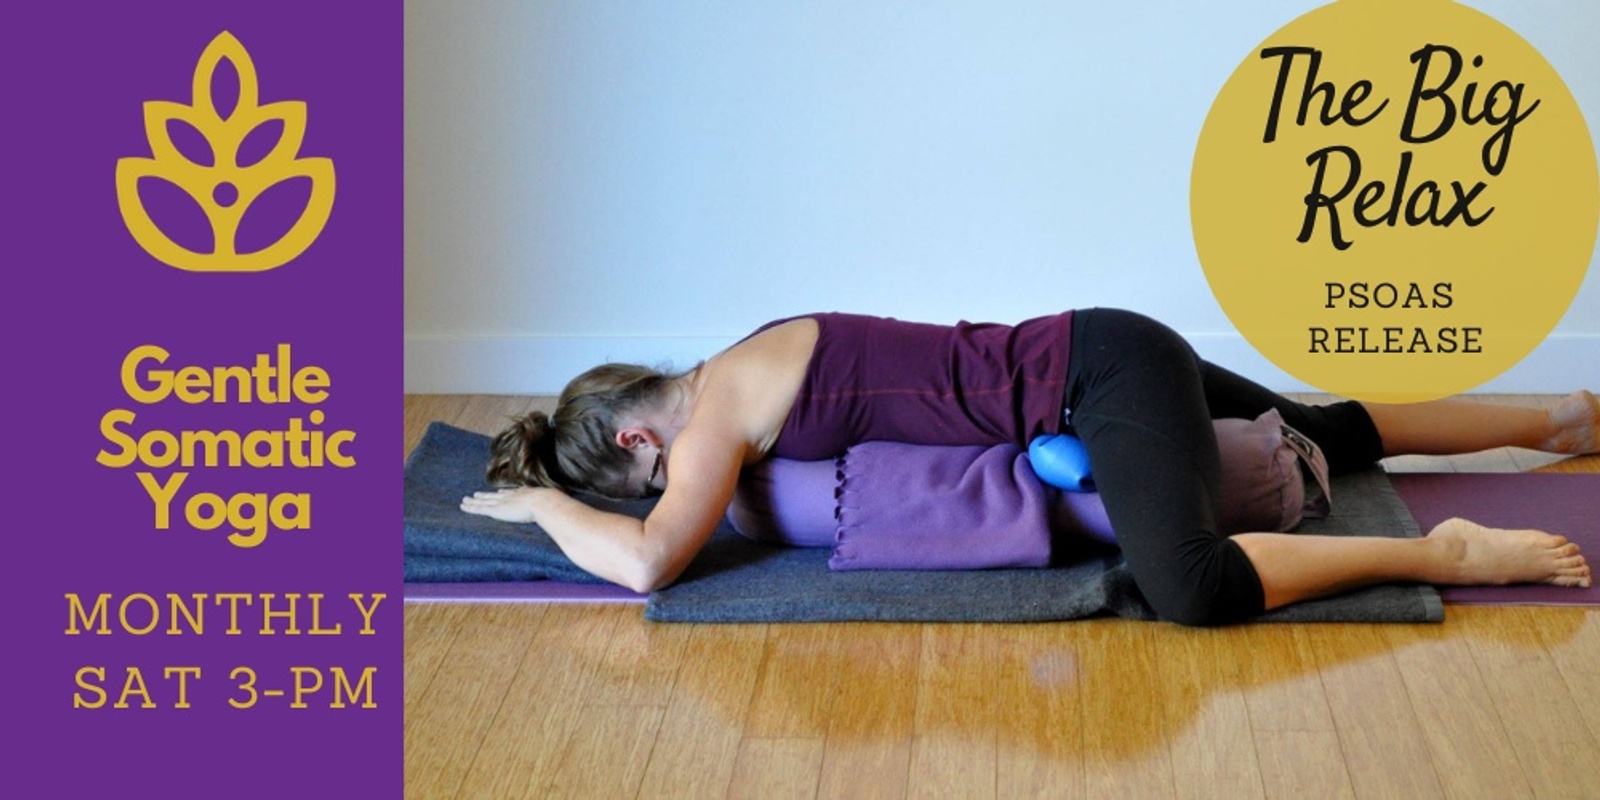 Banner image for The Big Relax - Psoas Release